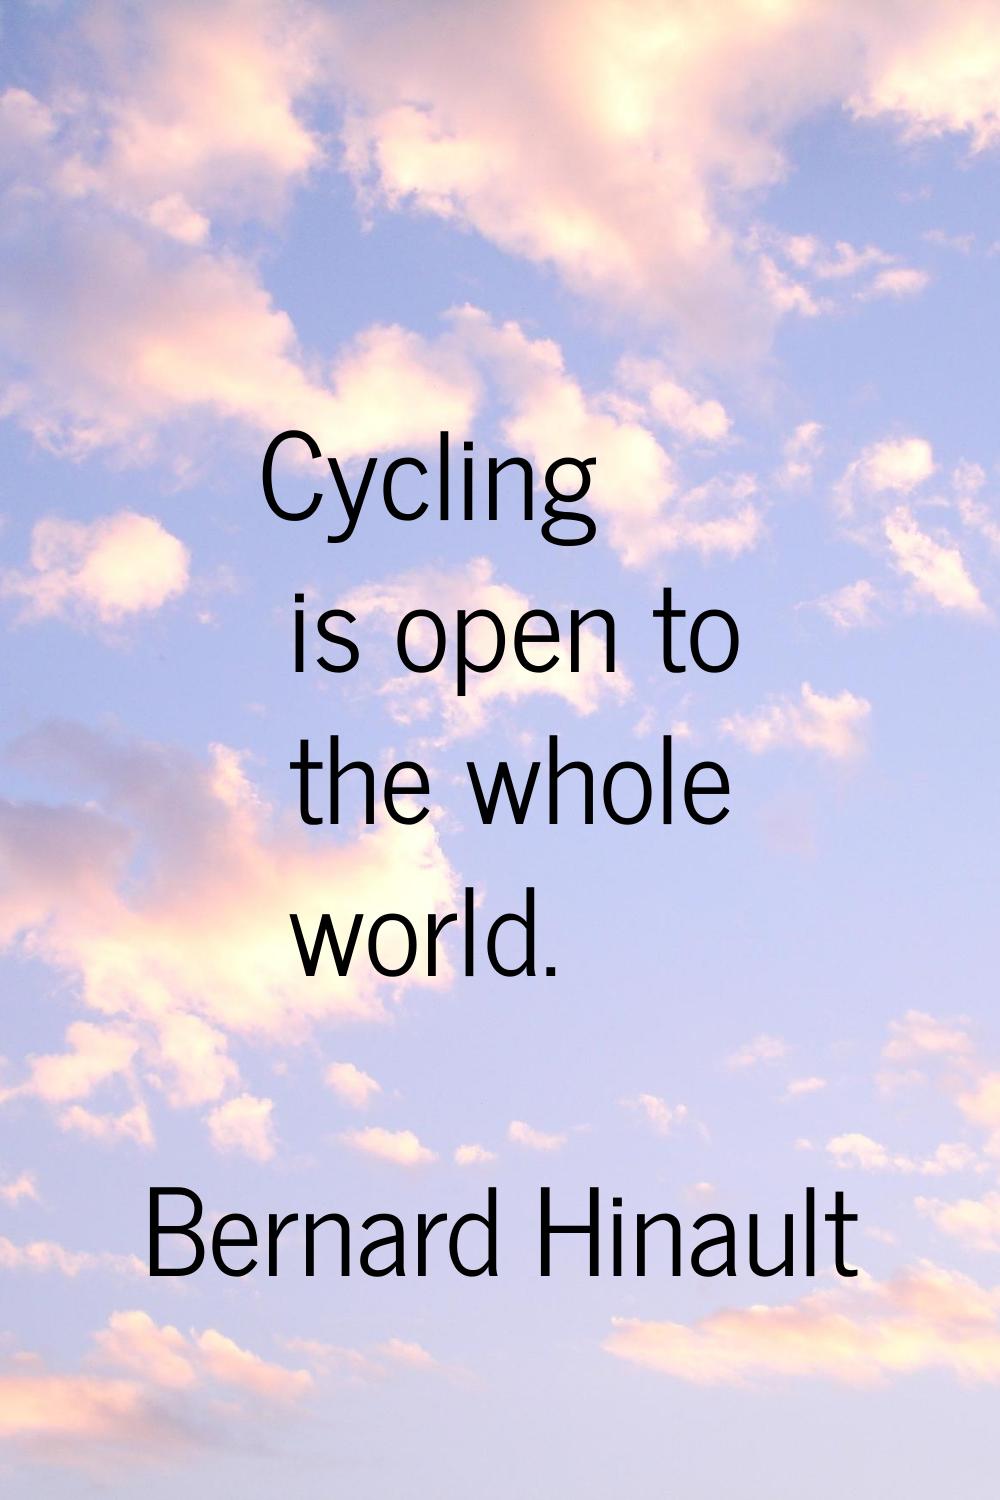 Cycling is open to the whole world.